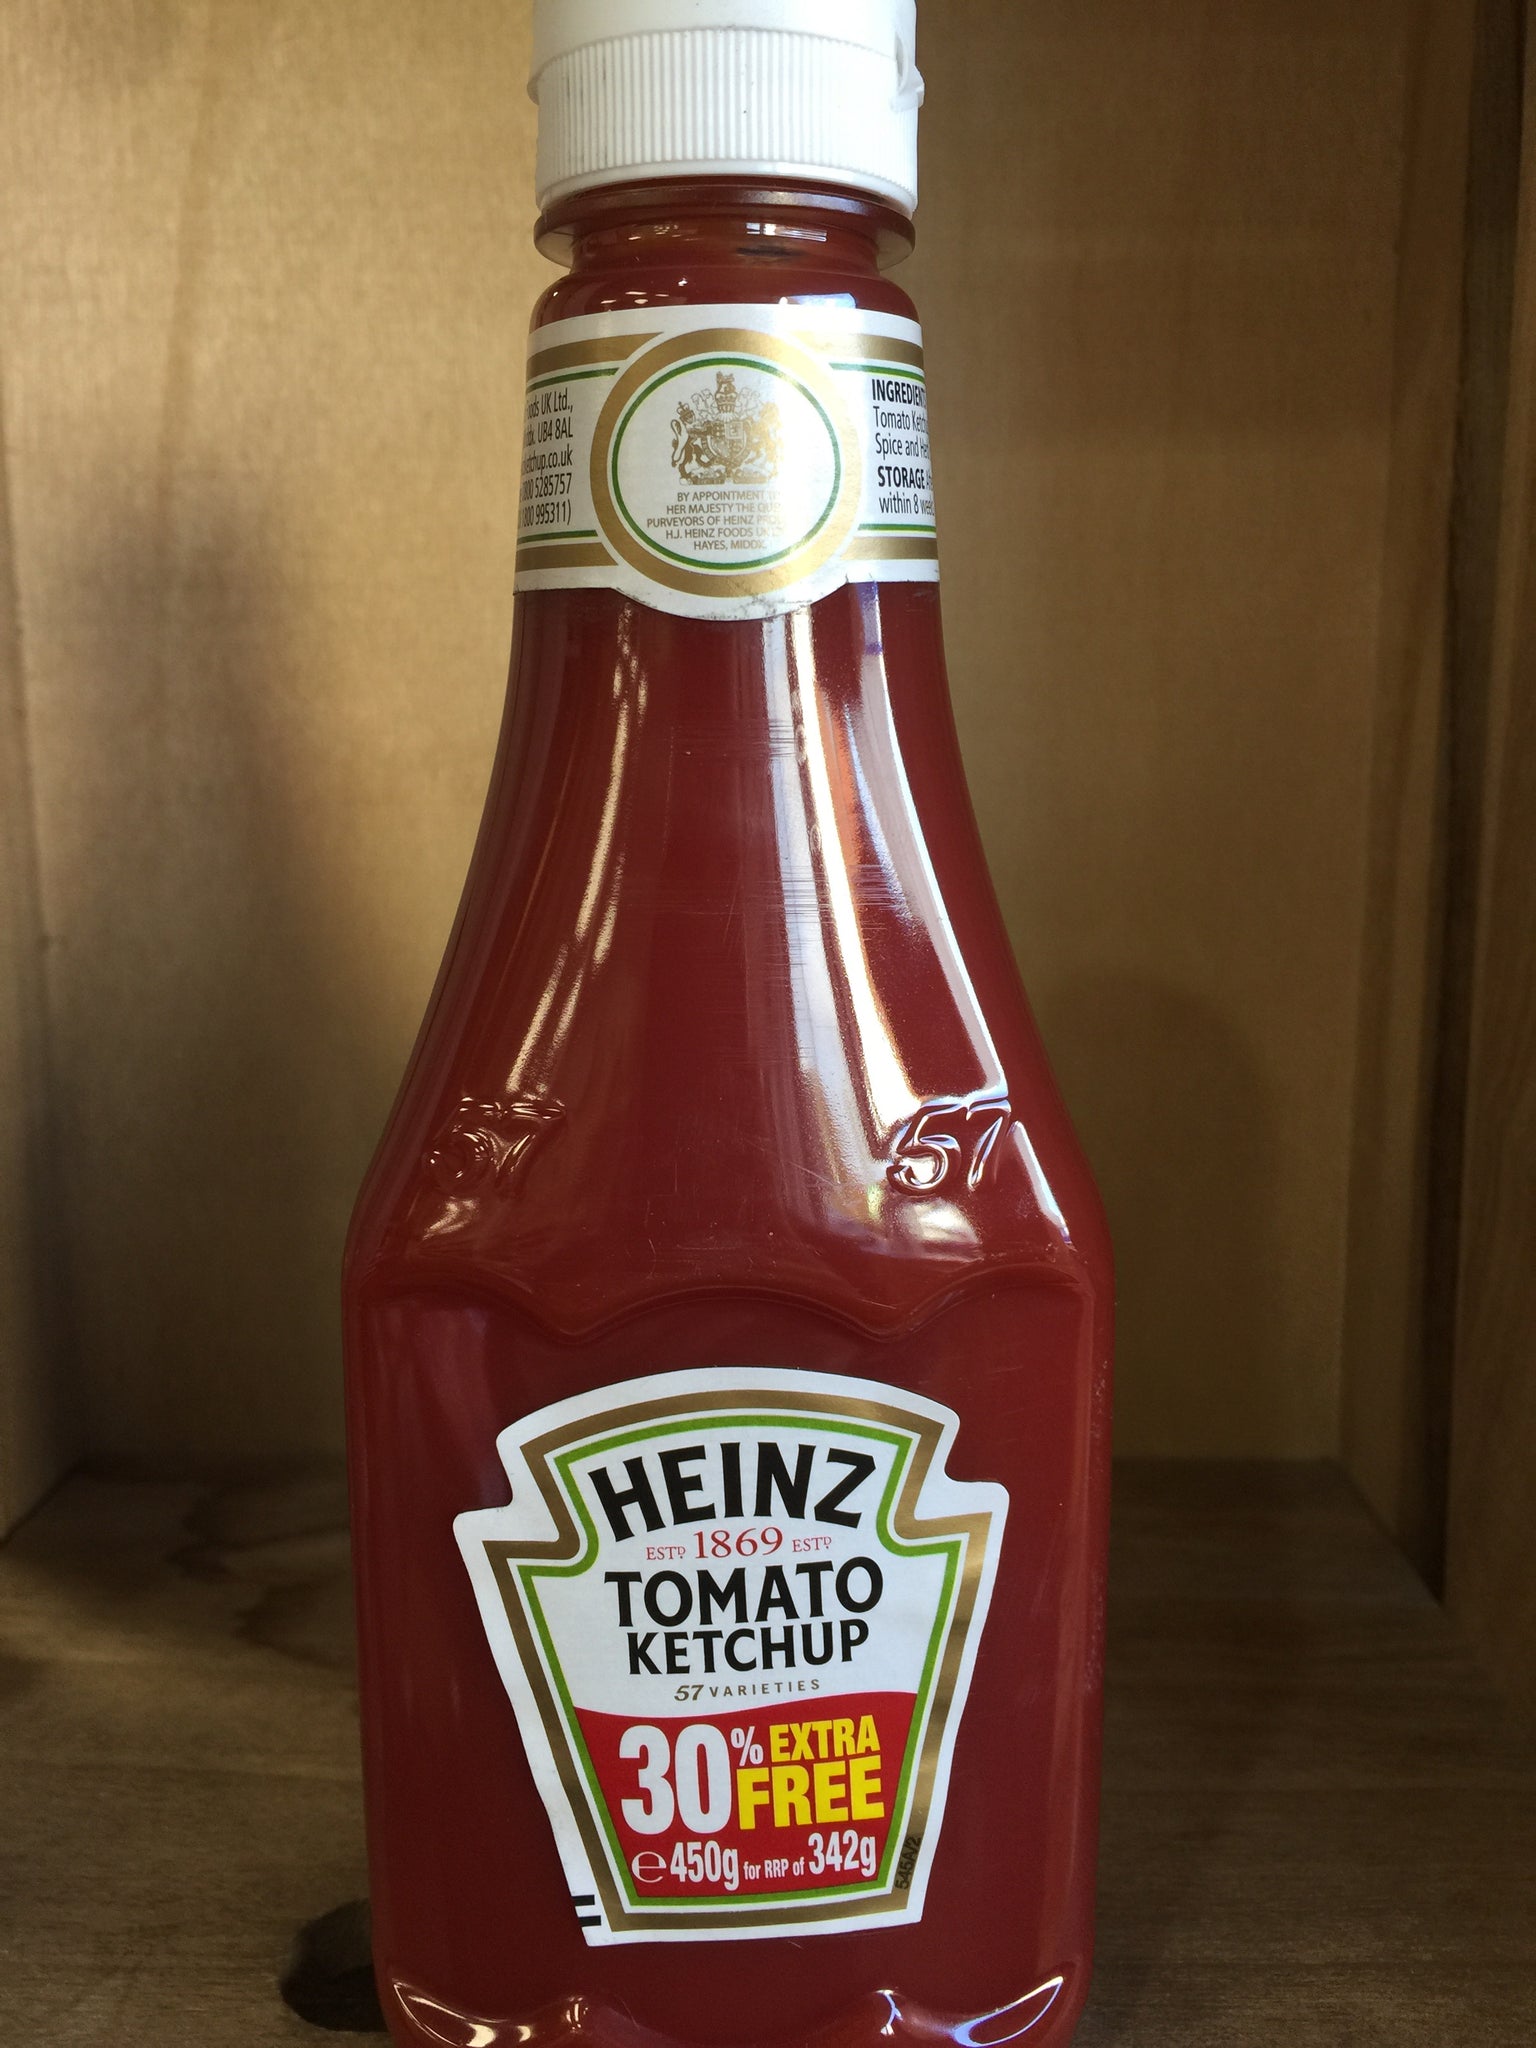 Heinz Tomato Ketchup 30% Extra Free 450g & Low Price Foods Ltd